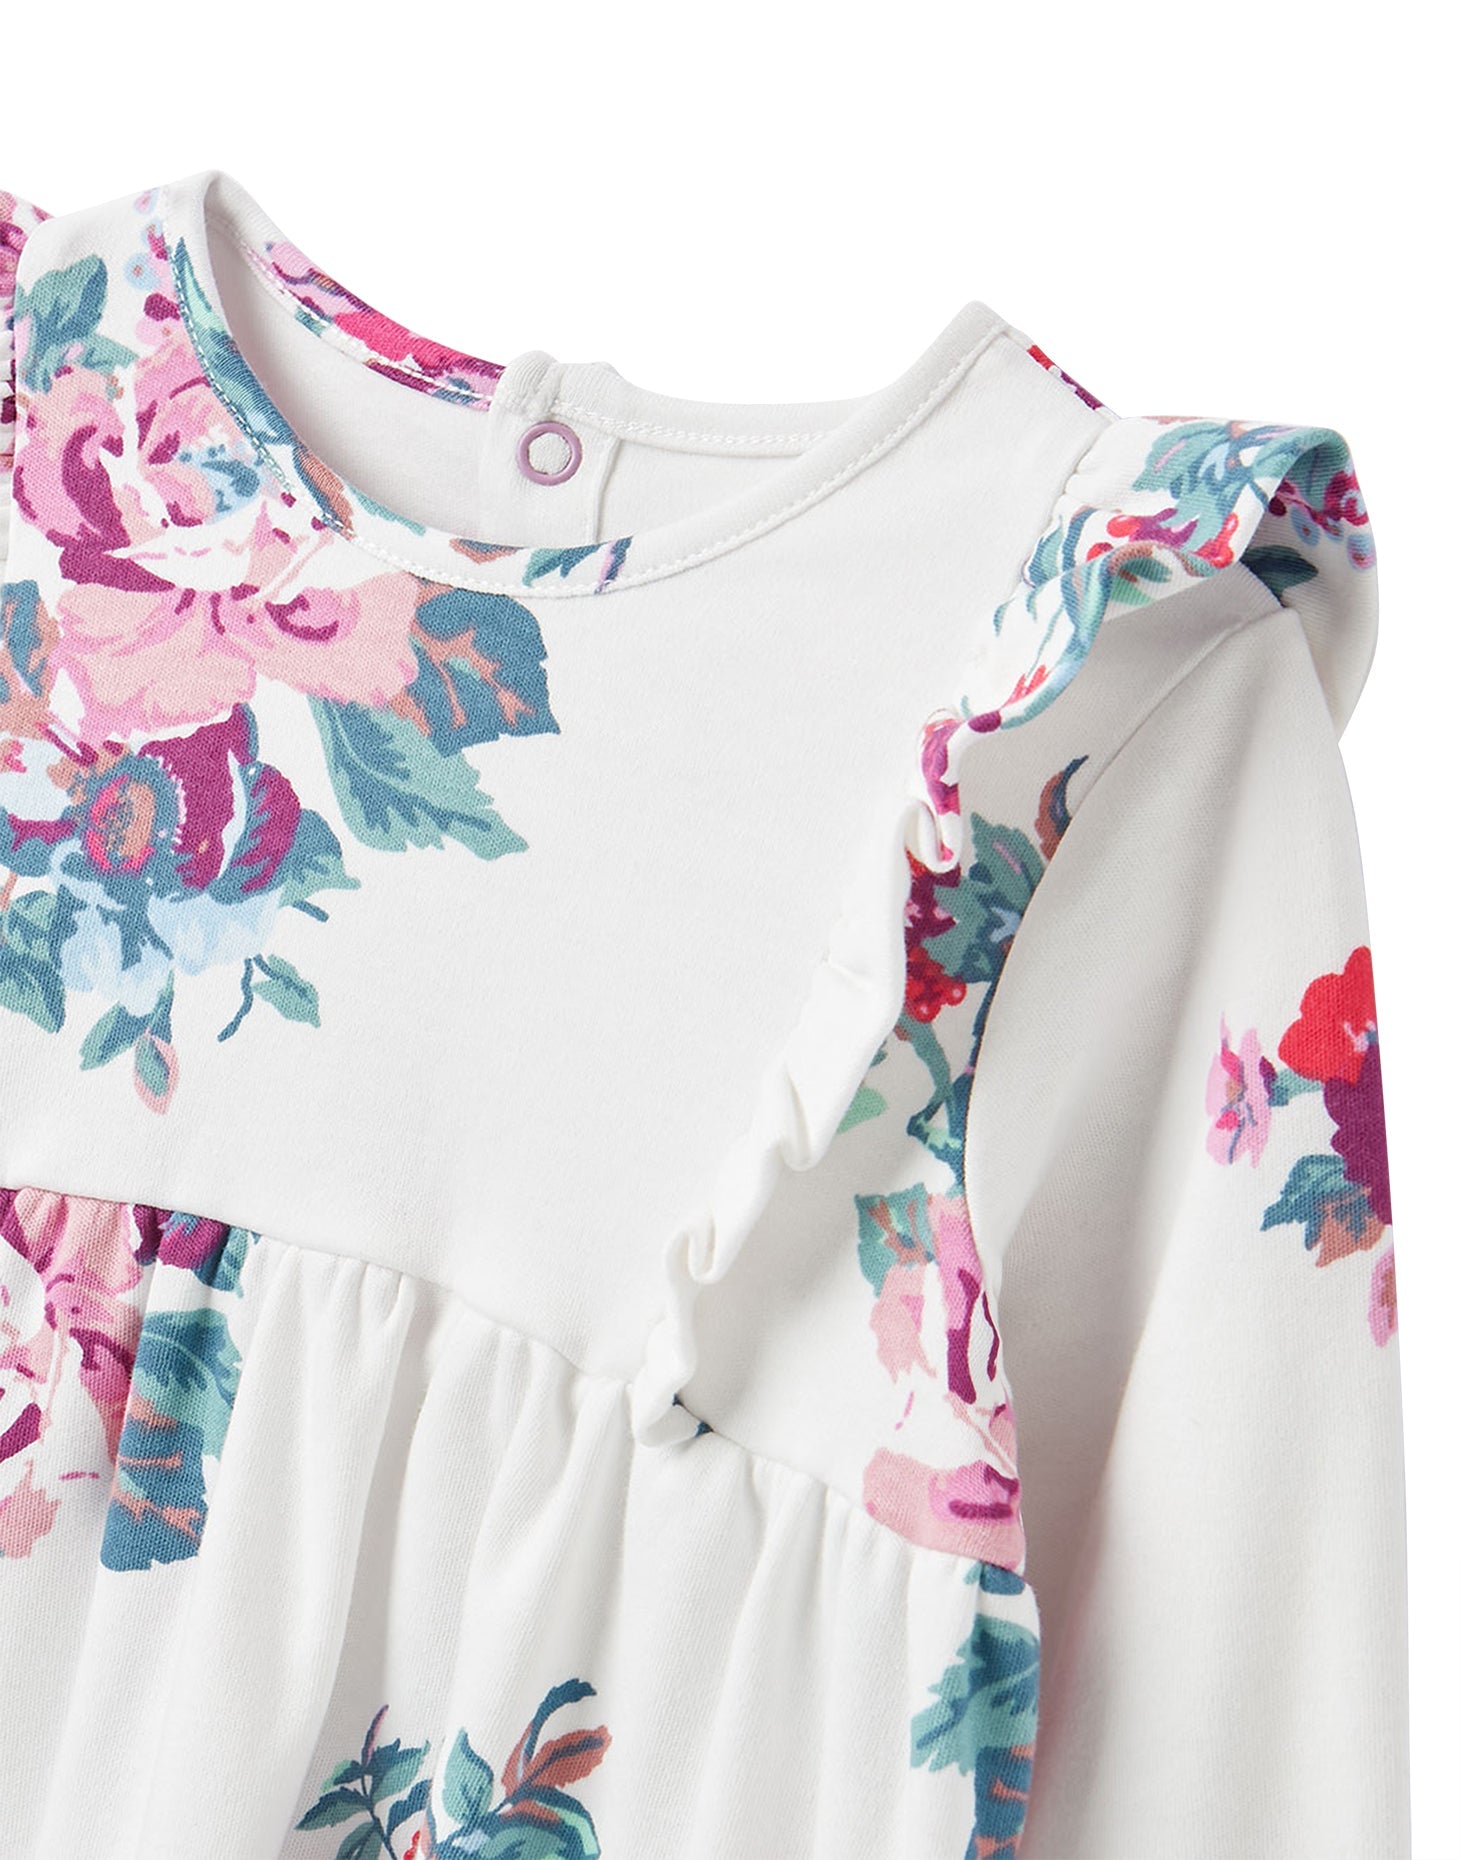 Joules Harleigh Dress Set - White Floral